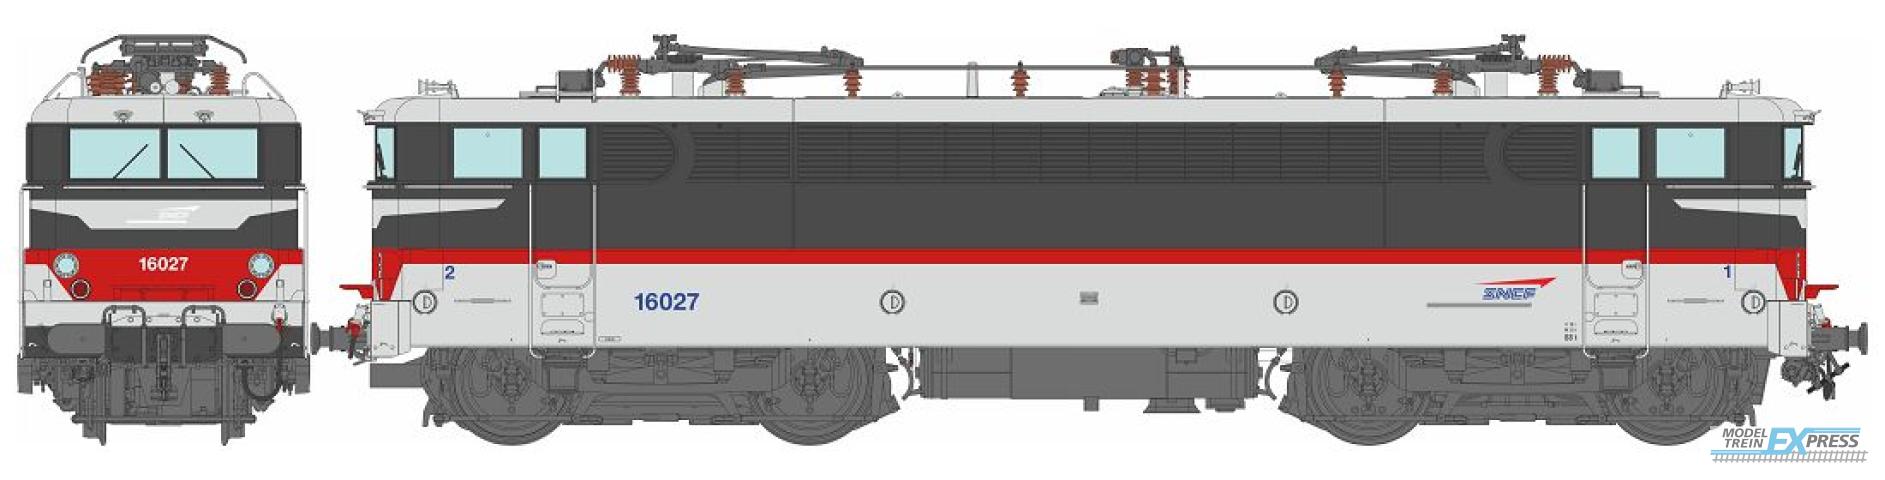 REE models MB-200S BB 16027 "MULTISERVICE" Livery ACHERES Era V - DCC Sound Functional Pantos